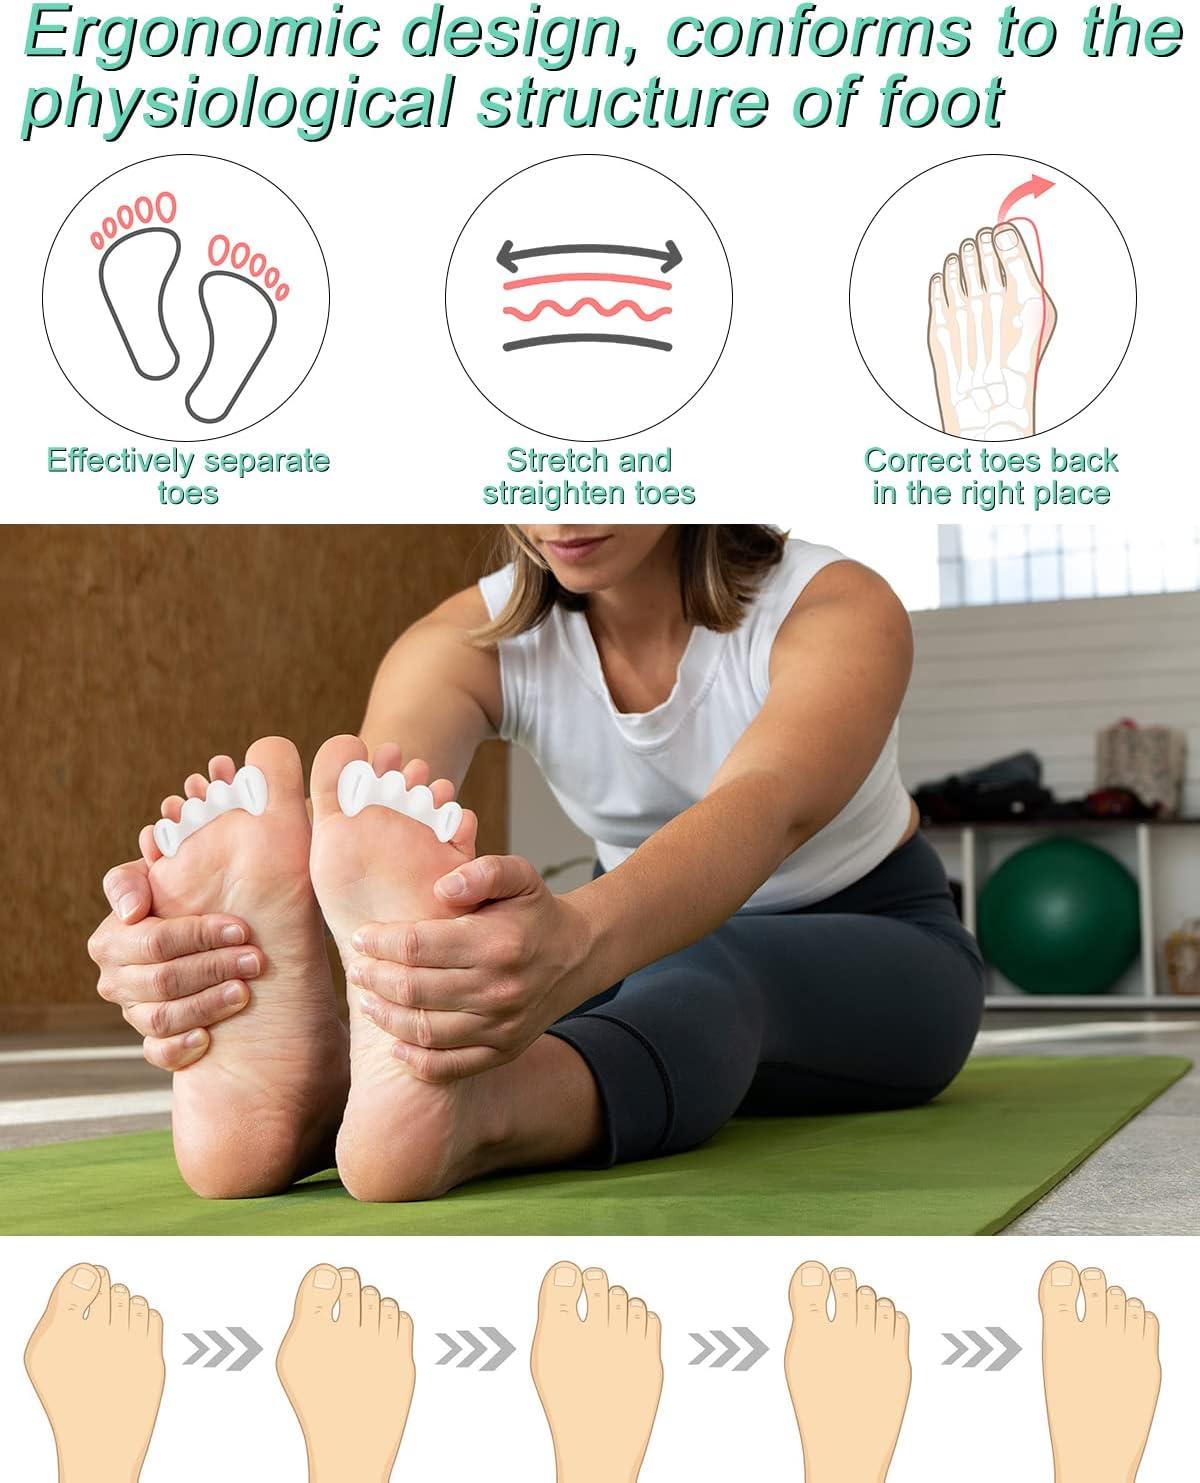 Exercises to Help Your Feet Adjust to Toe Spreaders (Toe Spacers)